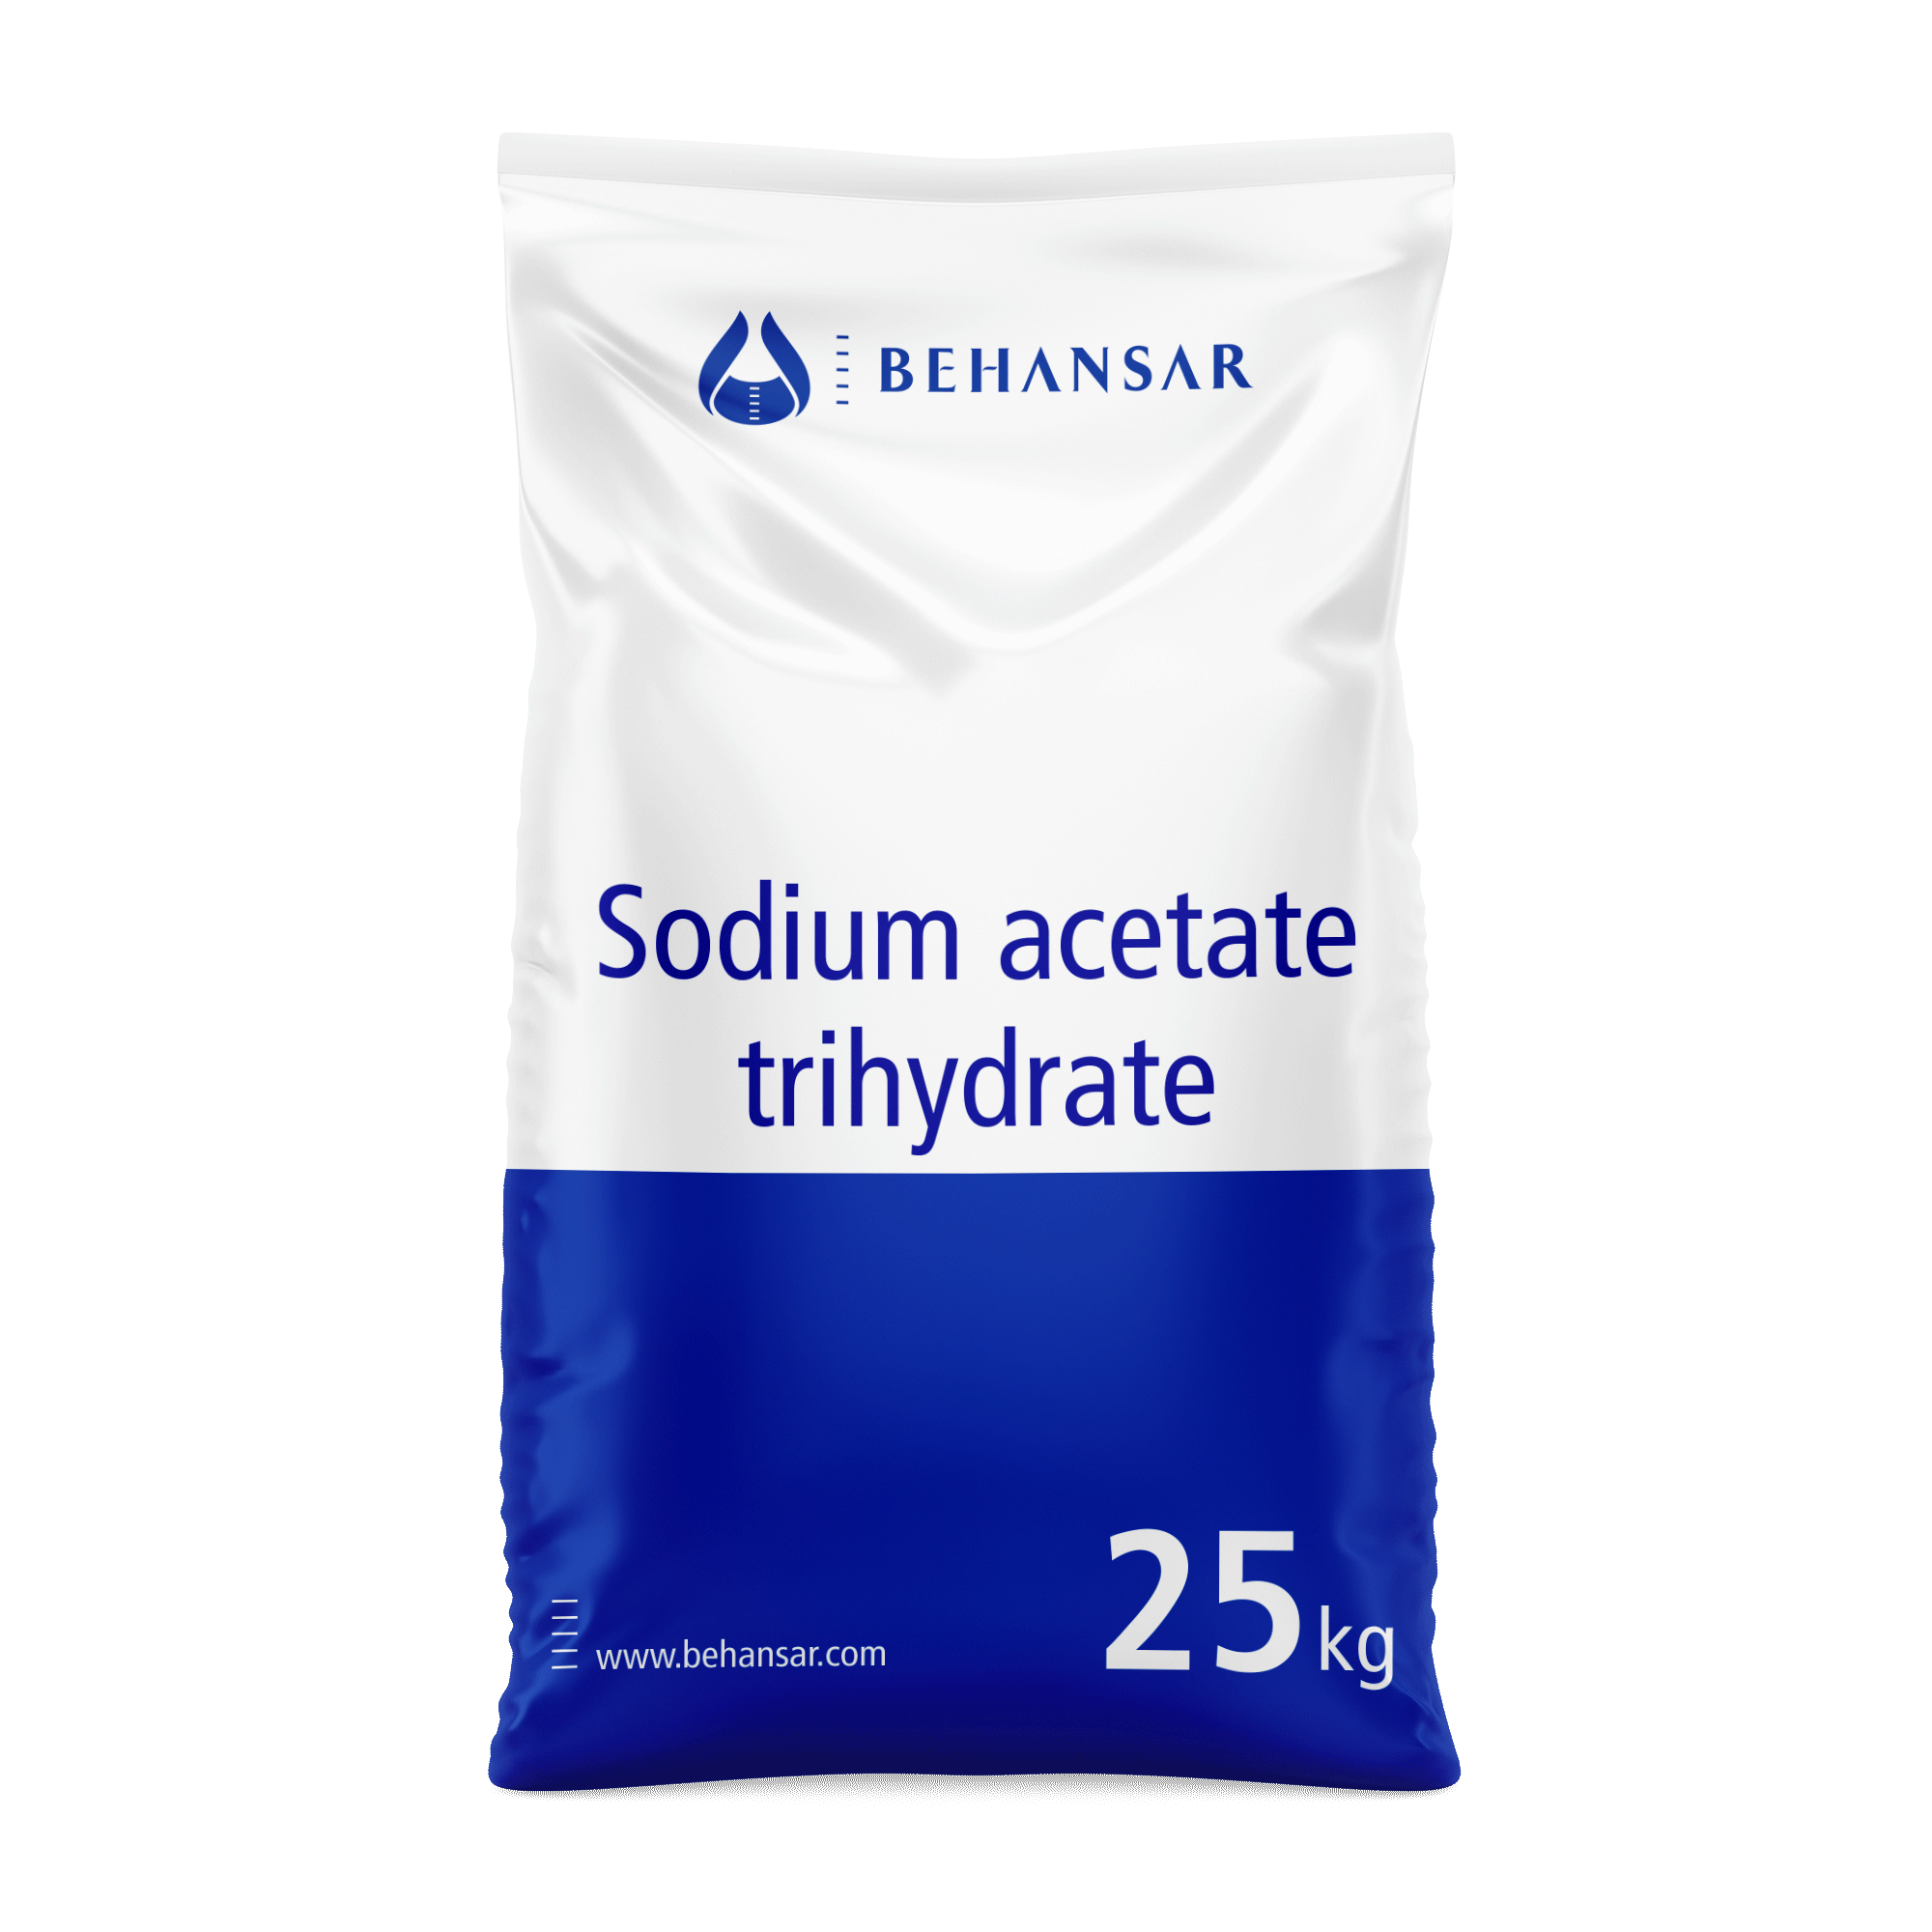 Sodium acetate trihydrate is one of the products of Behansar Co